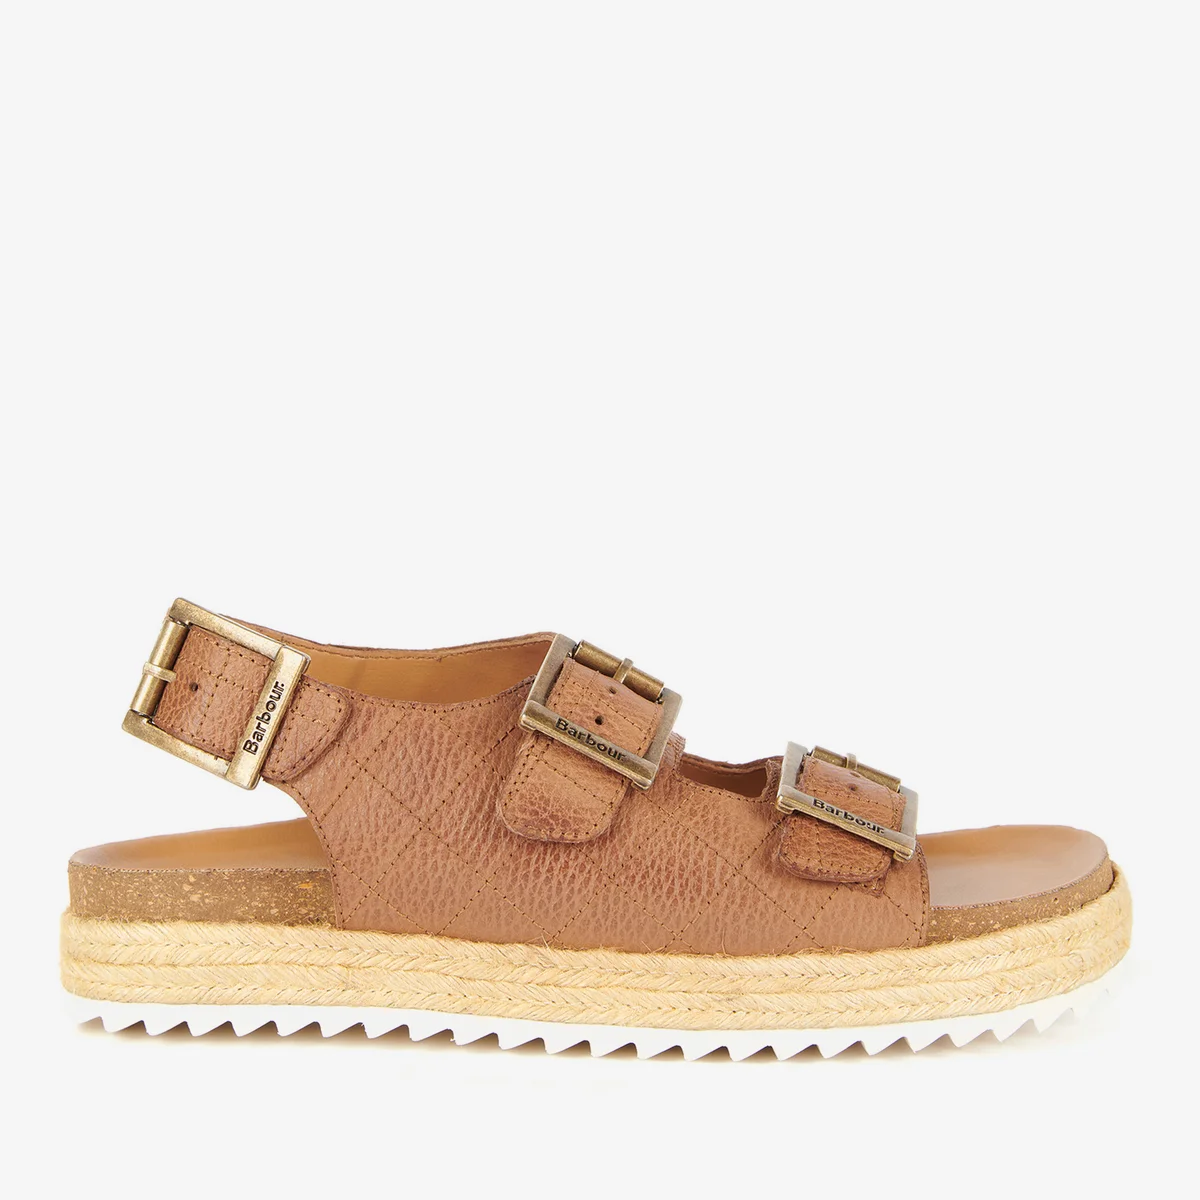 Barbour Helena Double Strap Leather Sandals Image 1